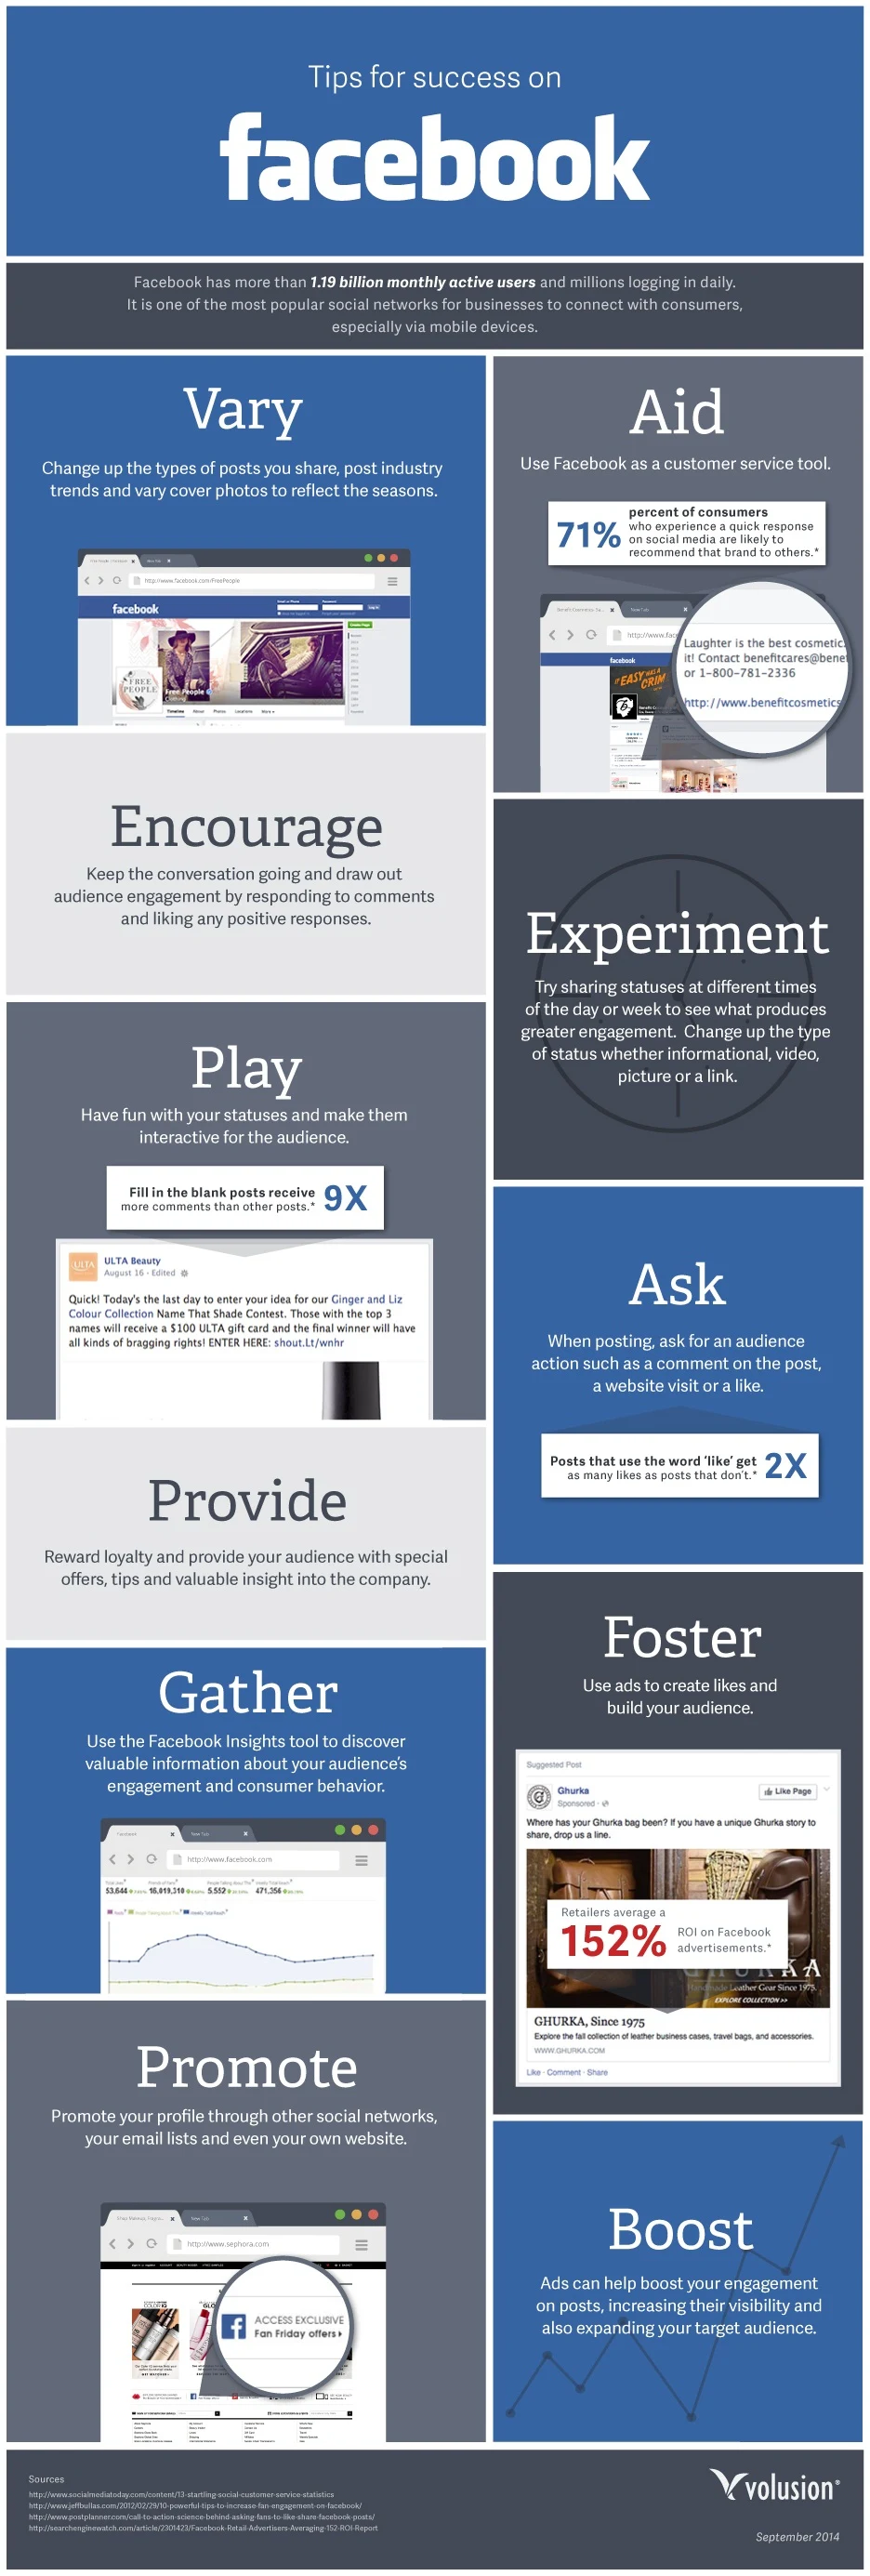 Marketing Tips for success on Facebook for companies - #infographic